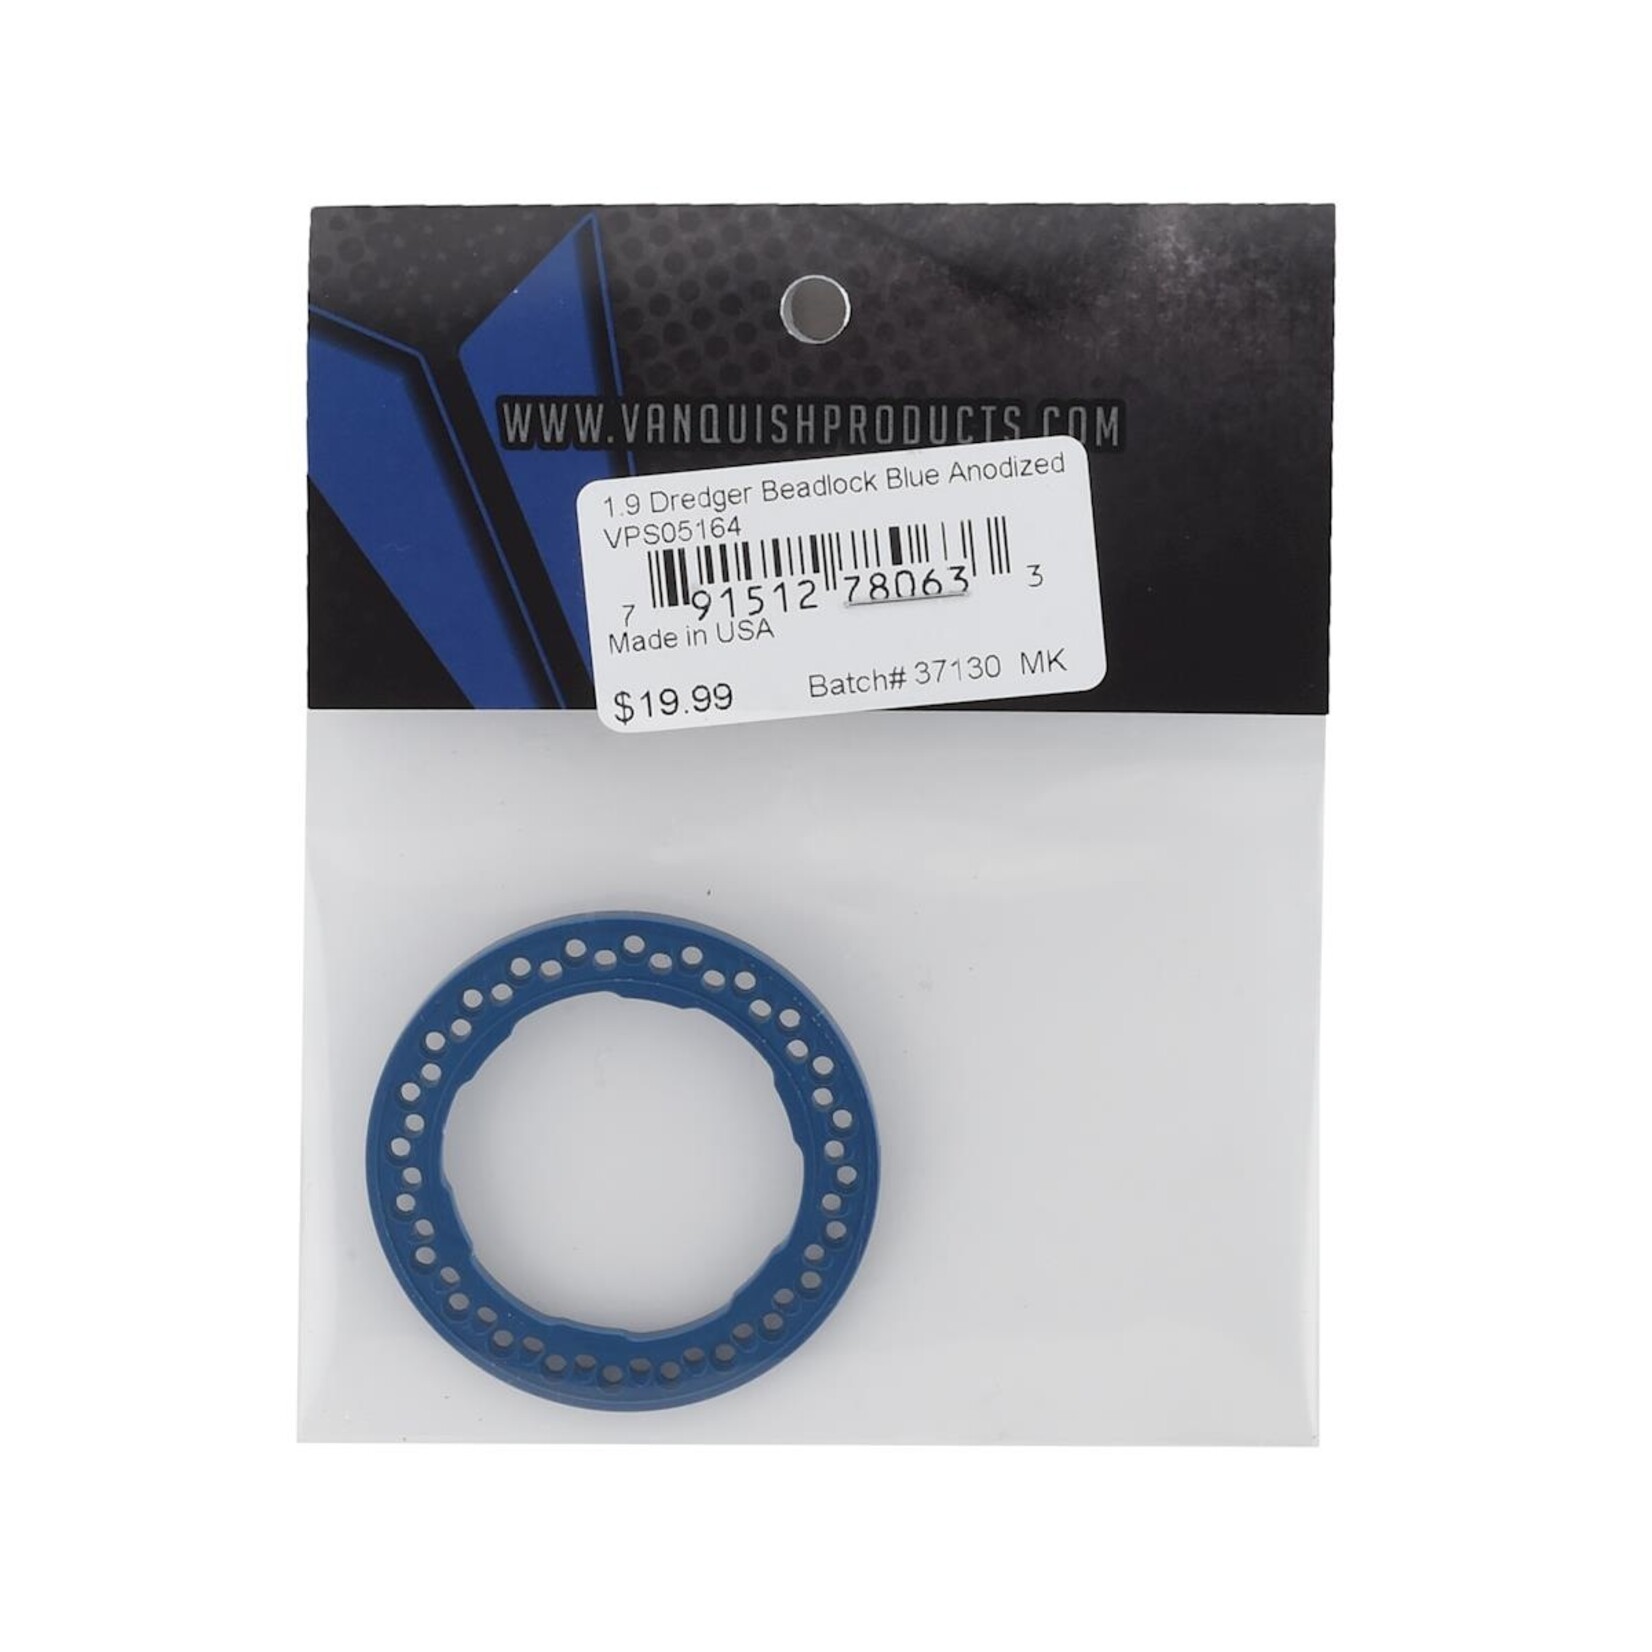 Vanquish Products Vanquish Products Dredger 1.9" Beadlock Ring (Blue) #VPS05164